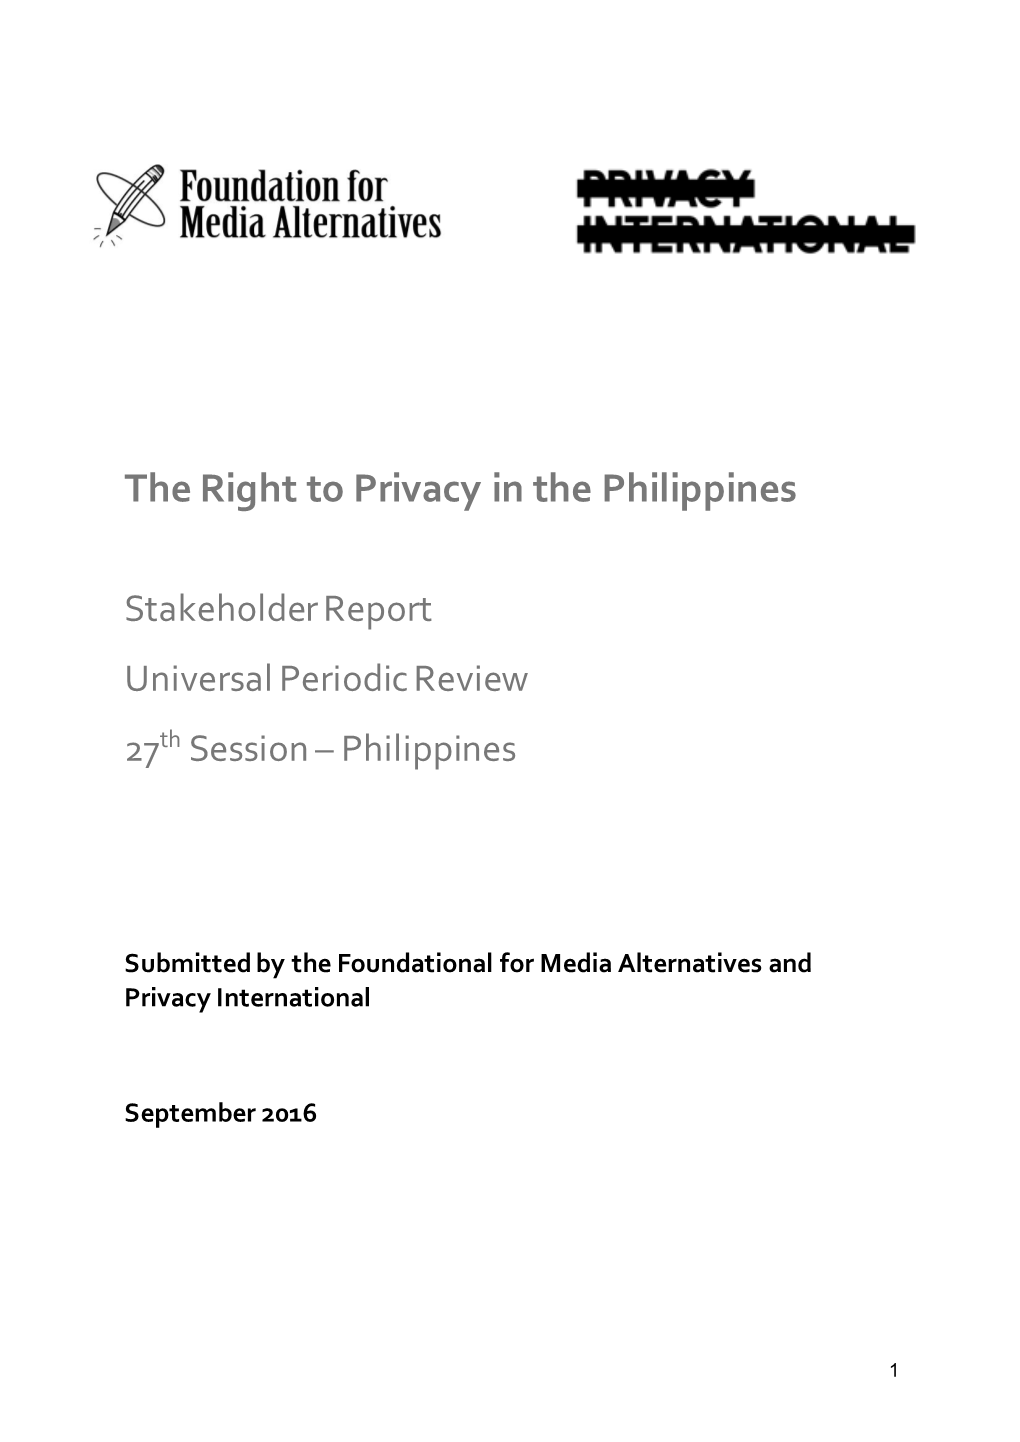 The Right to Privacy in the Philippines